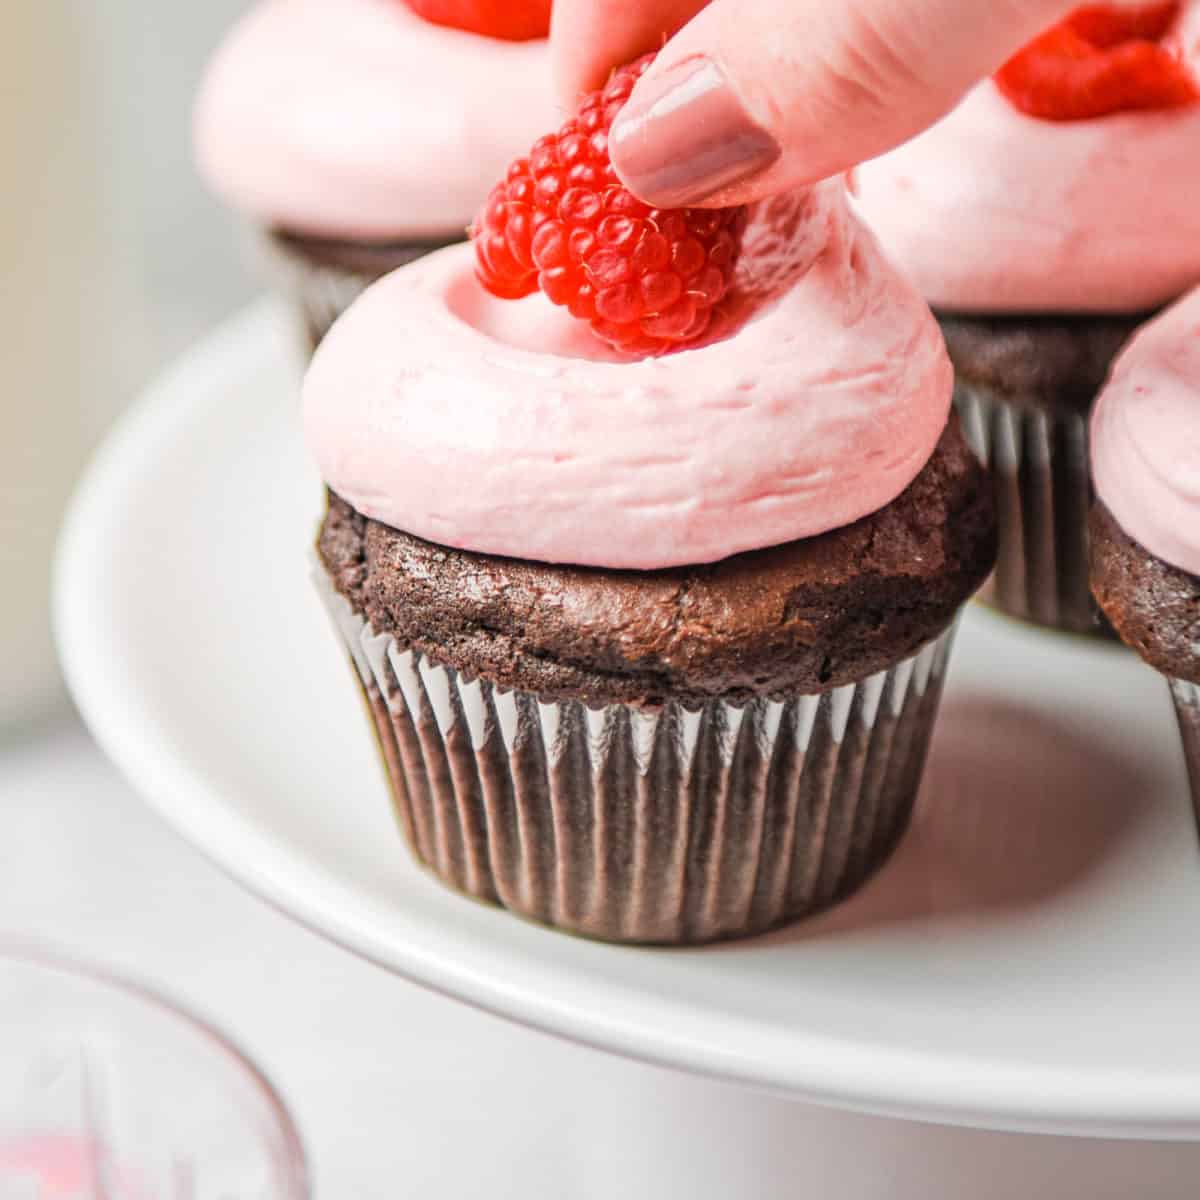 Placing a fresh raspberry on top of a chocolate cupcake.